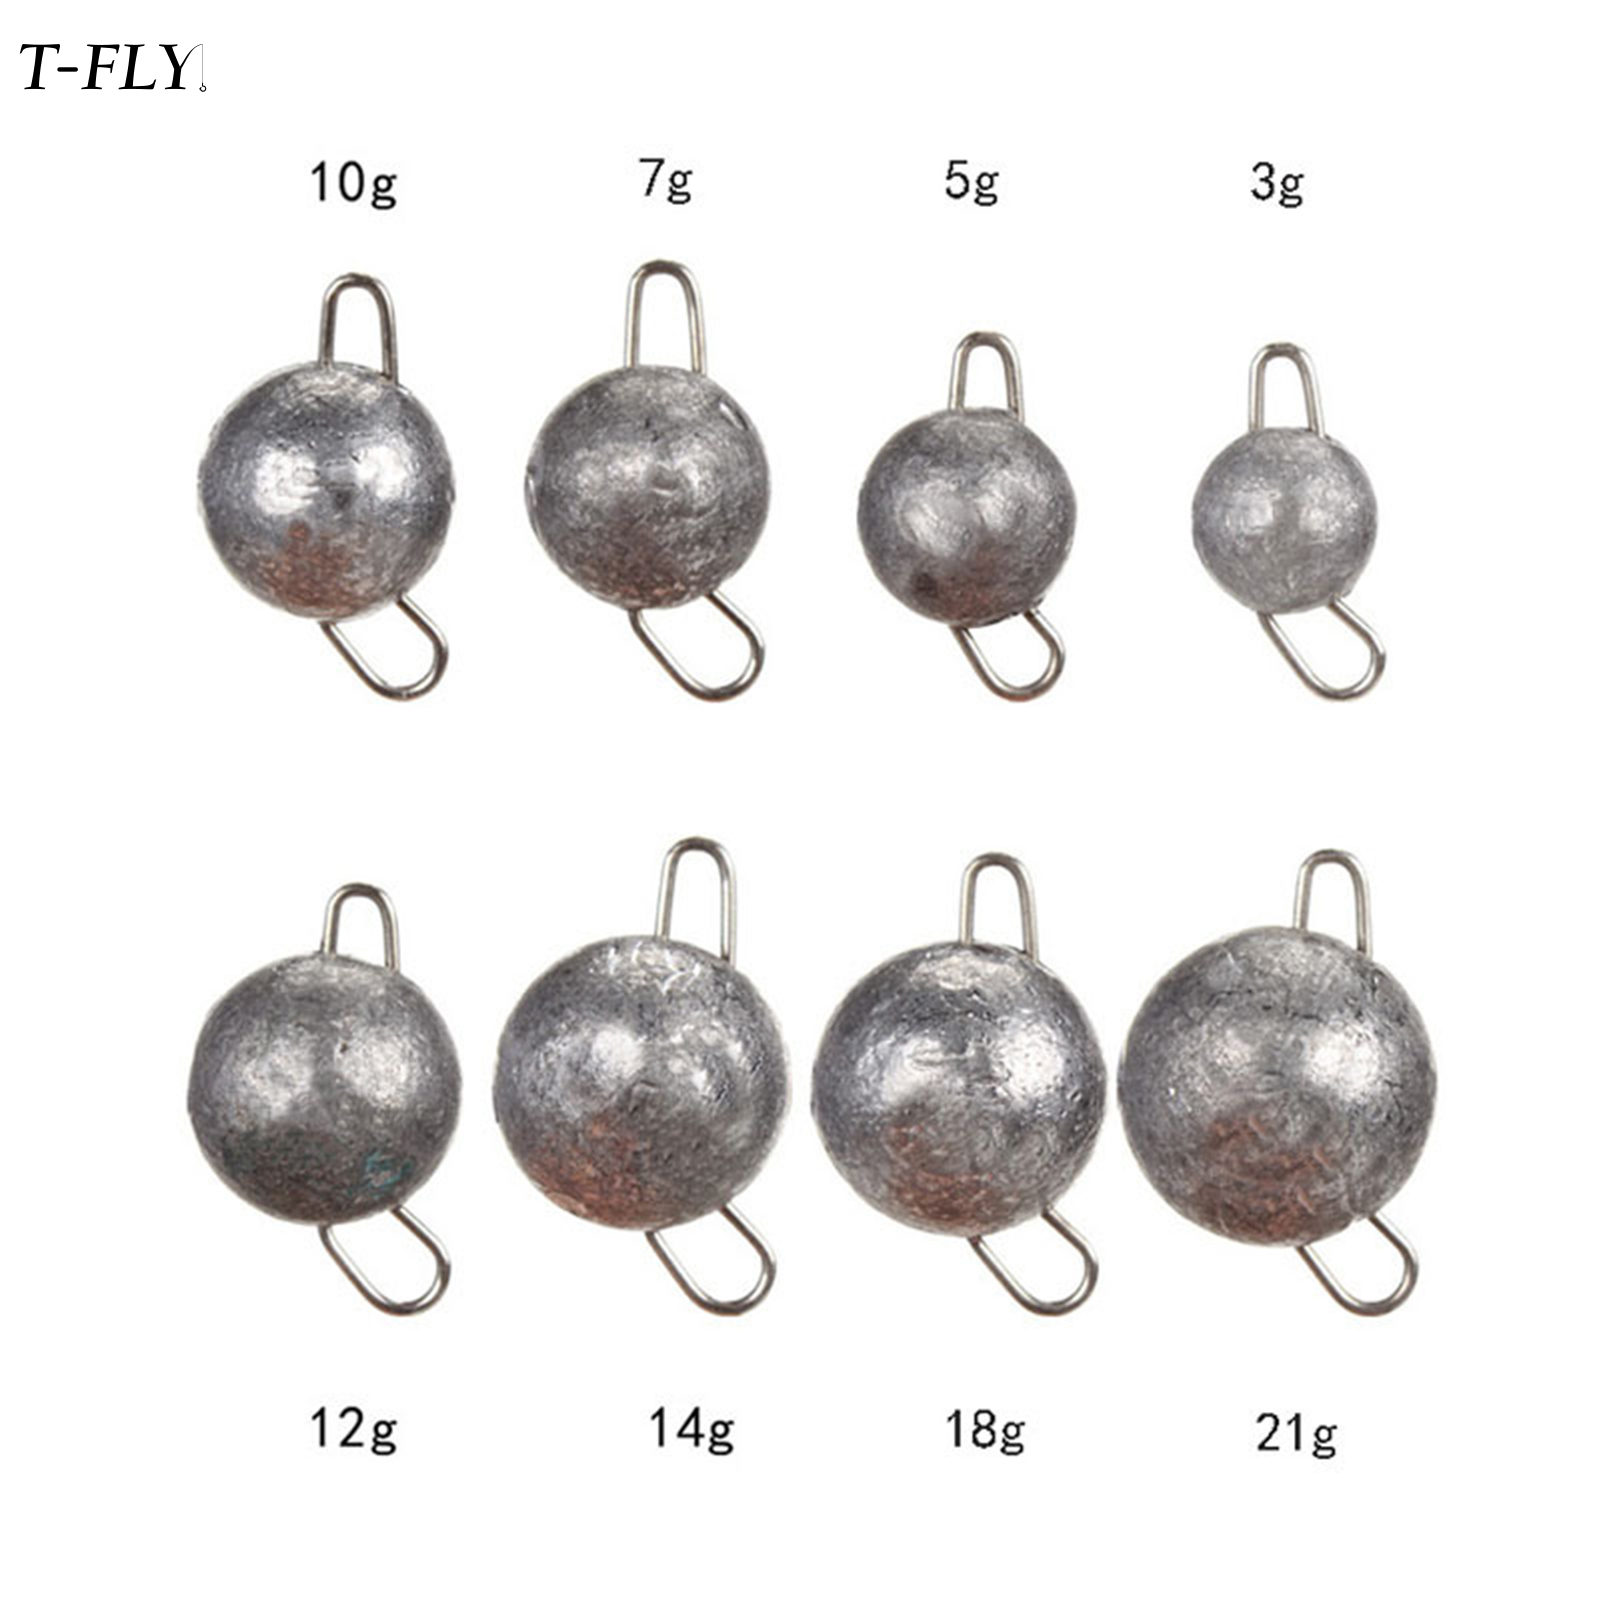 T-FLY Fishing Weights Split Shots Sinkers Round Fishing Weights